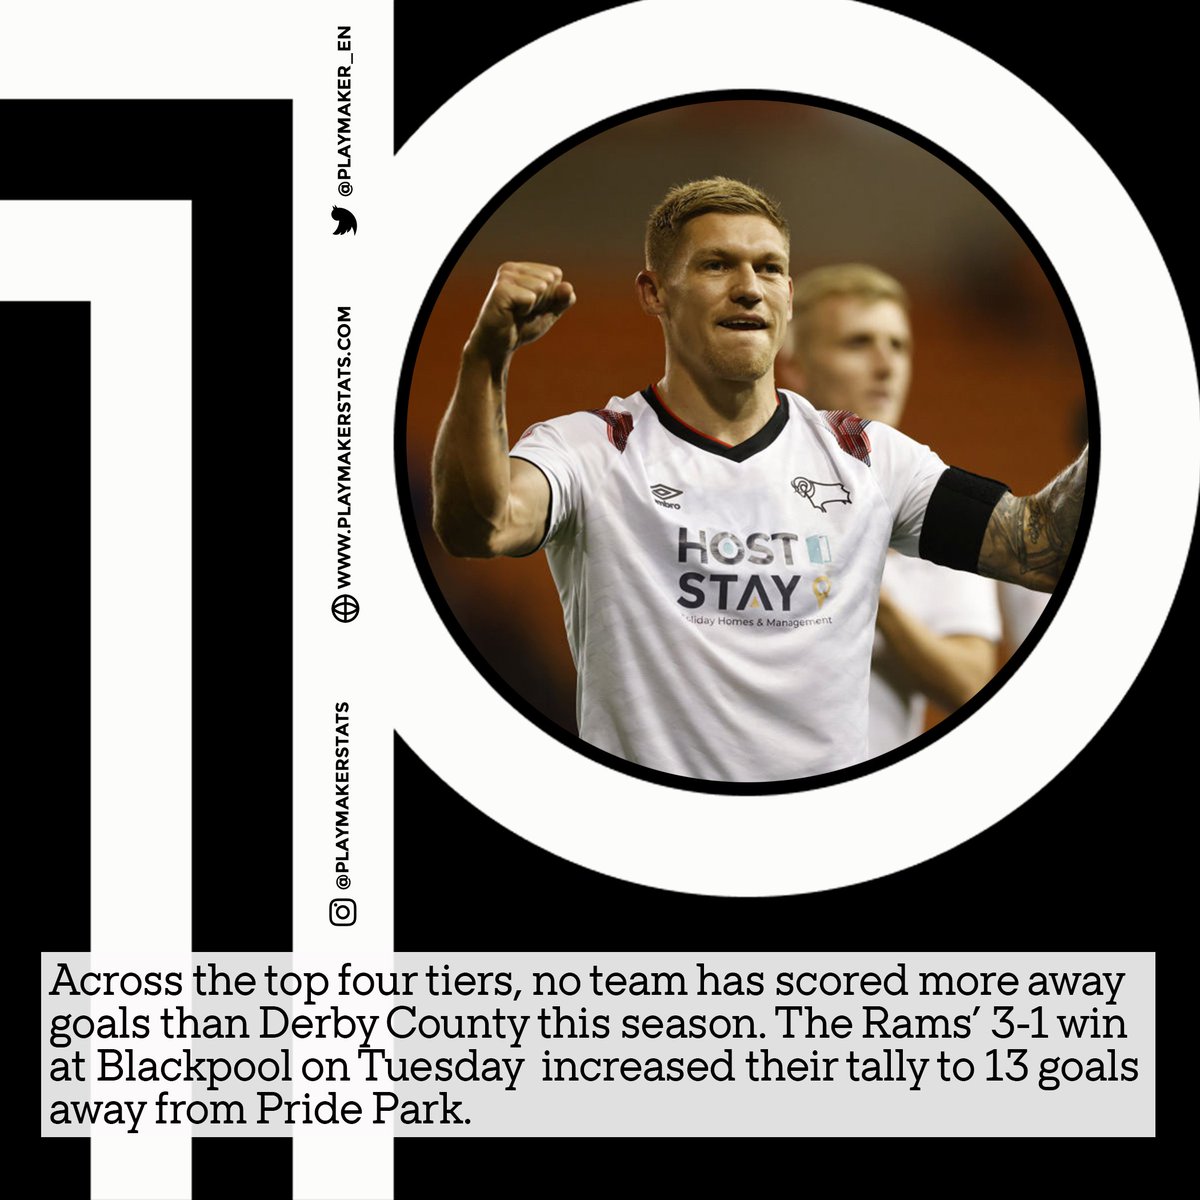 🚌Most AWAY goals in 23/24 (top four tiers): 13⚽️: 🐏DERBY COUNTY🐏, Leicester 11⚽️: Tottenham, Norwich, Barnsley, Oxford, Stevenage, Crewe, MK Dons, Notts County, AFC Wimbledon #DCFC